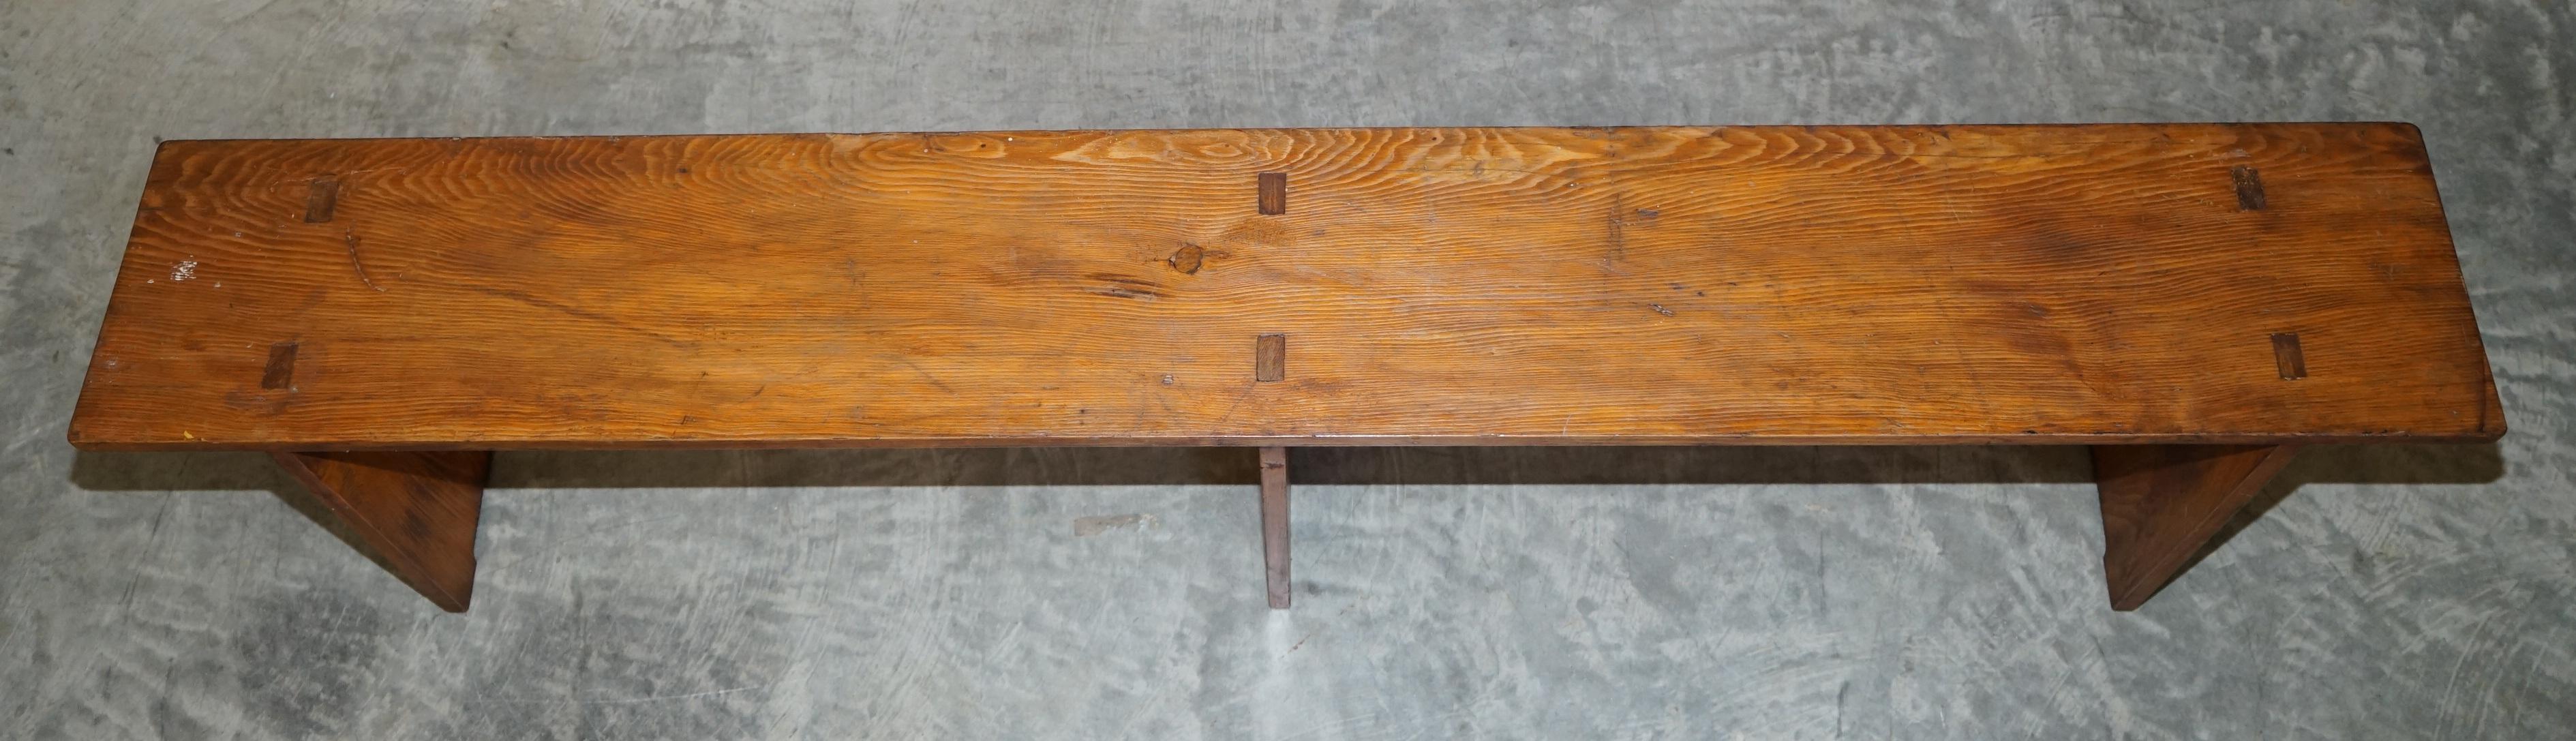 pitch pine table